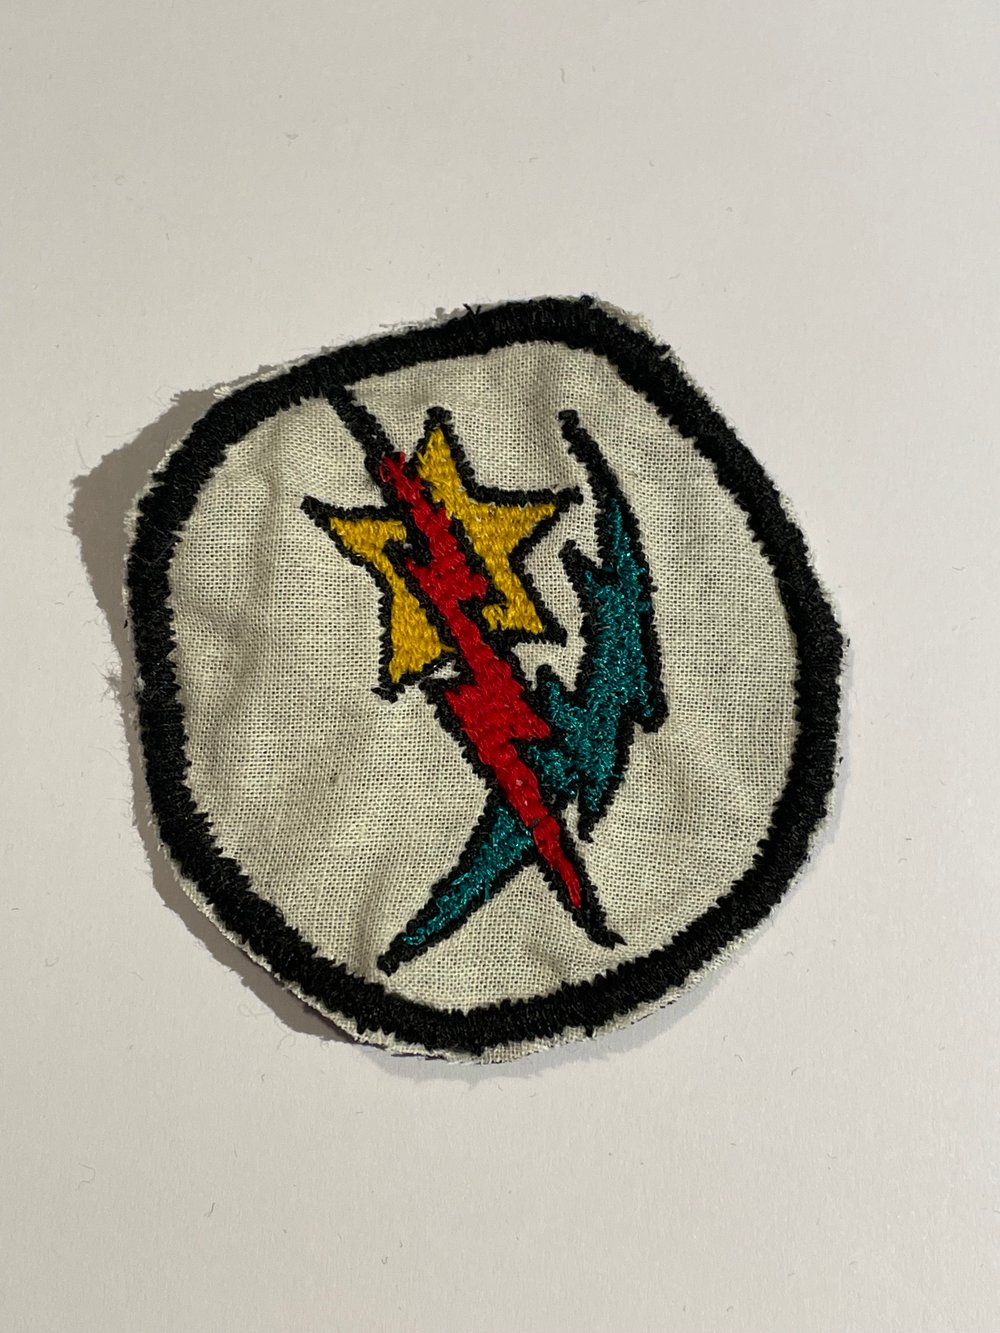 Image of Zap patch.